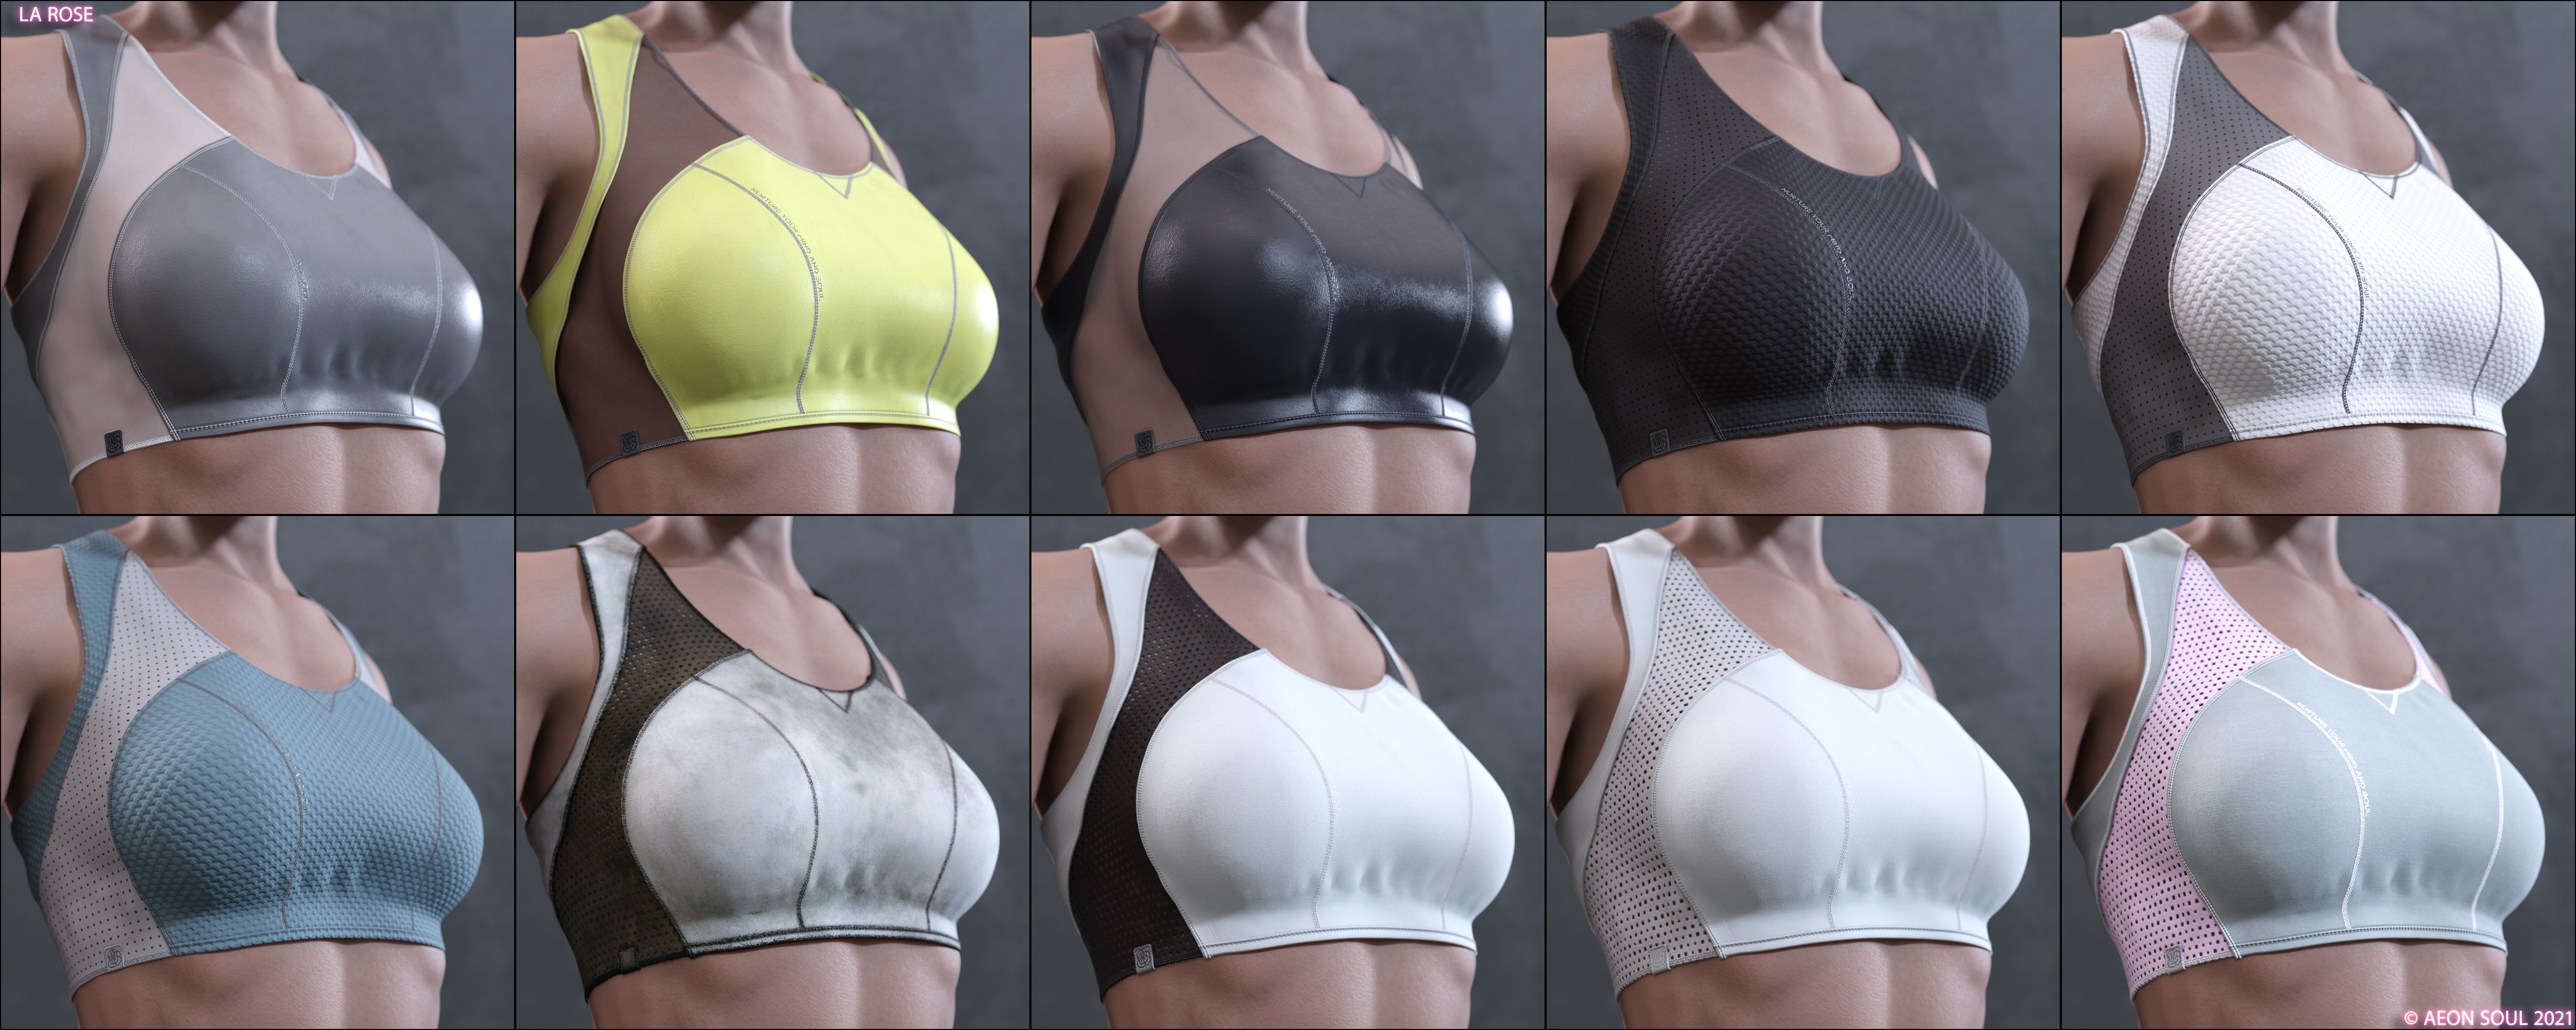 Expressive Styles for Zero One Clothes by: Aeon Soul, 3D Models by Daz 3D